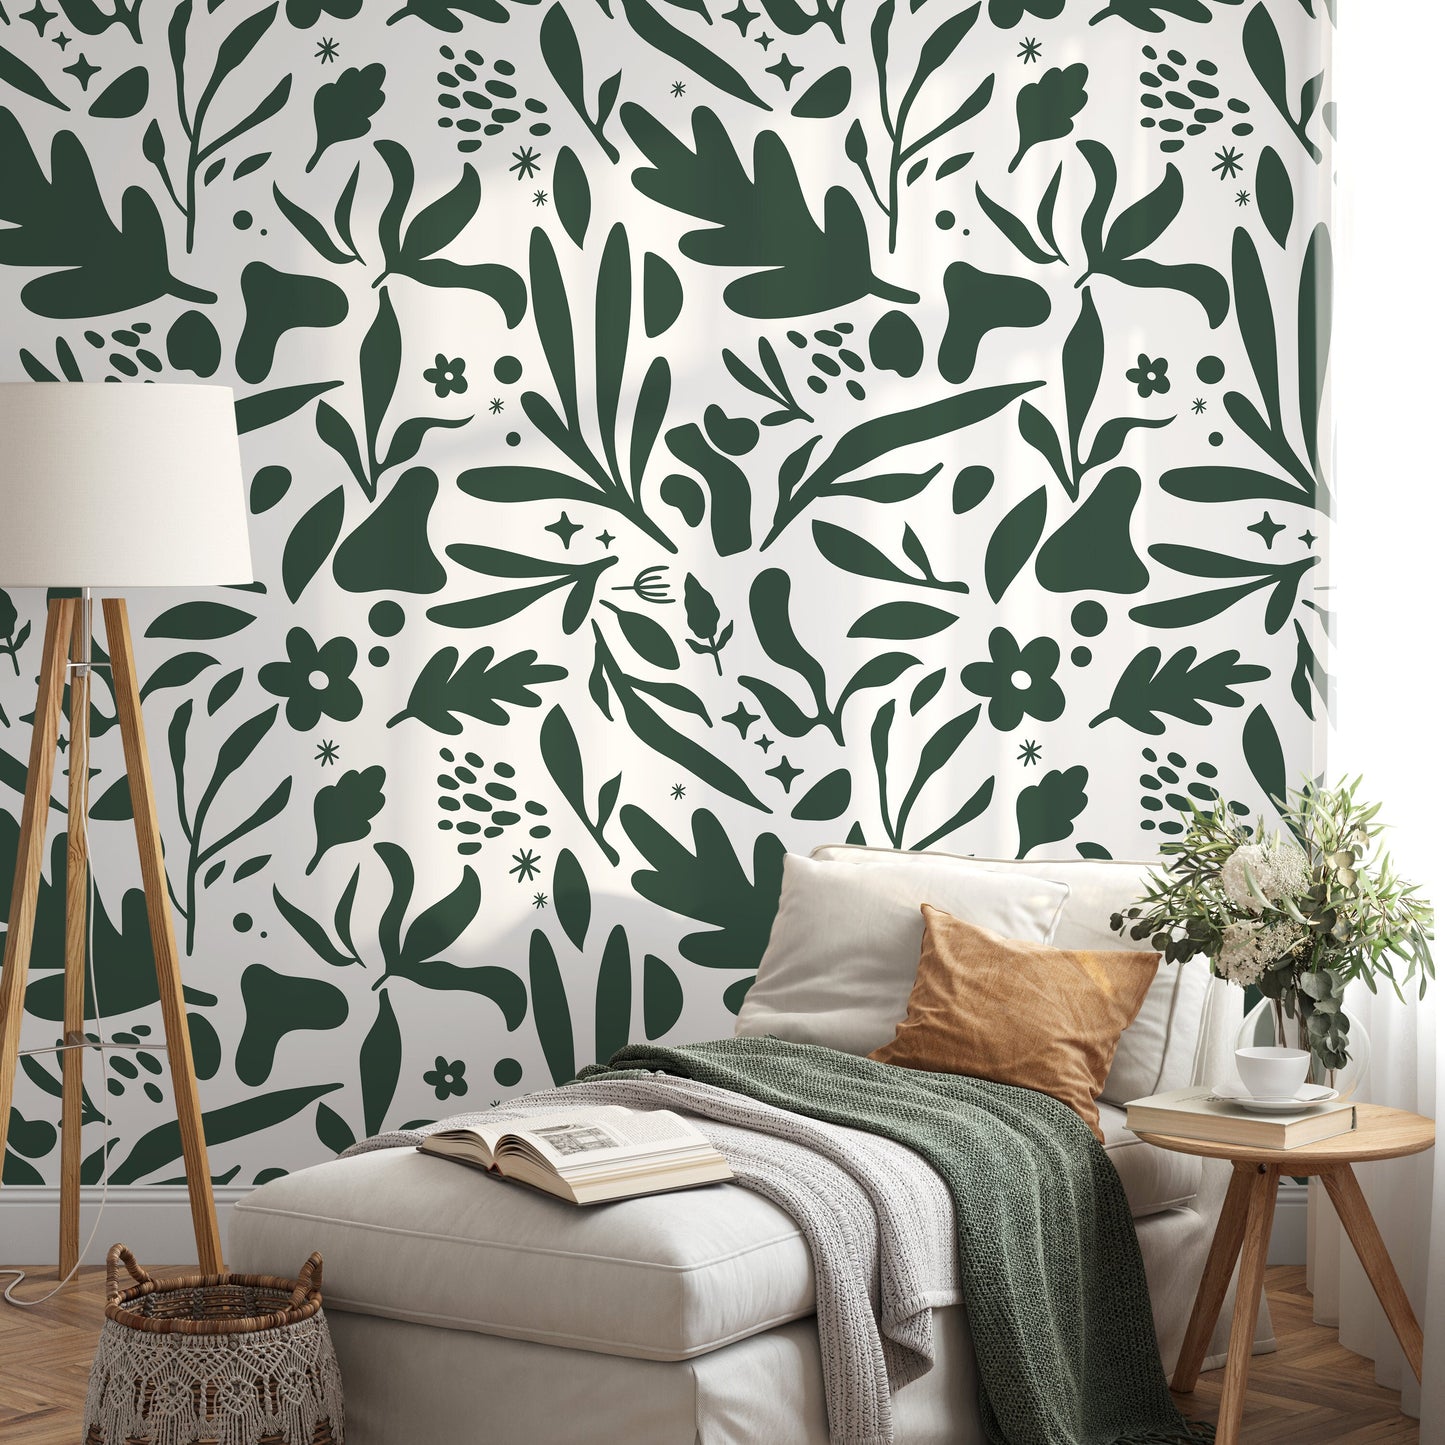 Green Leaves Removable Wallpaper Wall Decor Home Decor Wall Art Printable Wall Art Room Decor Wall Prints Wall Hanging -AS2-B924